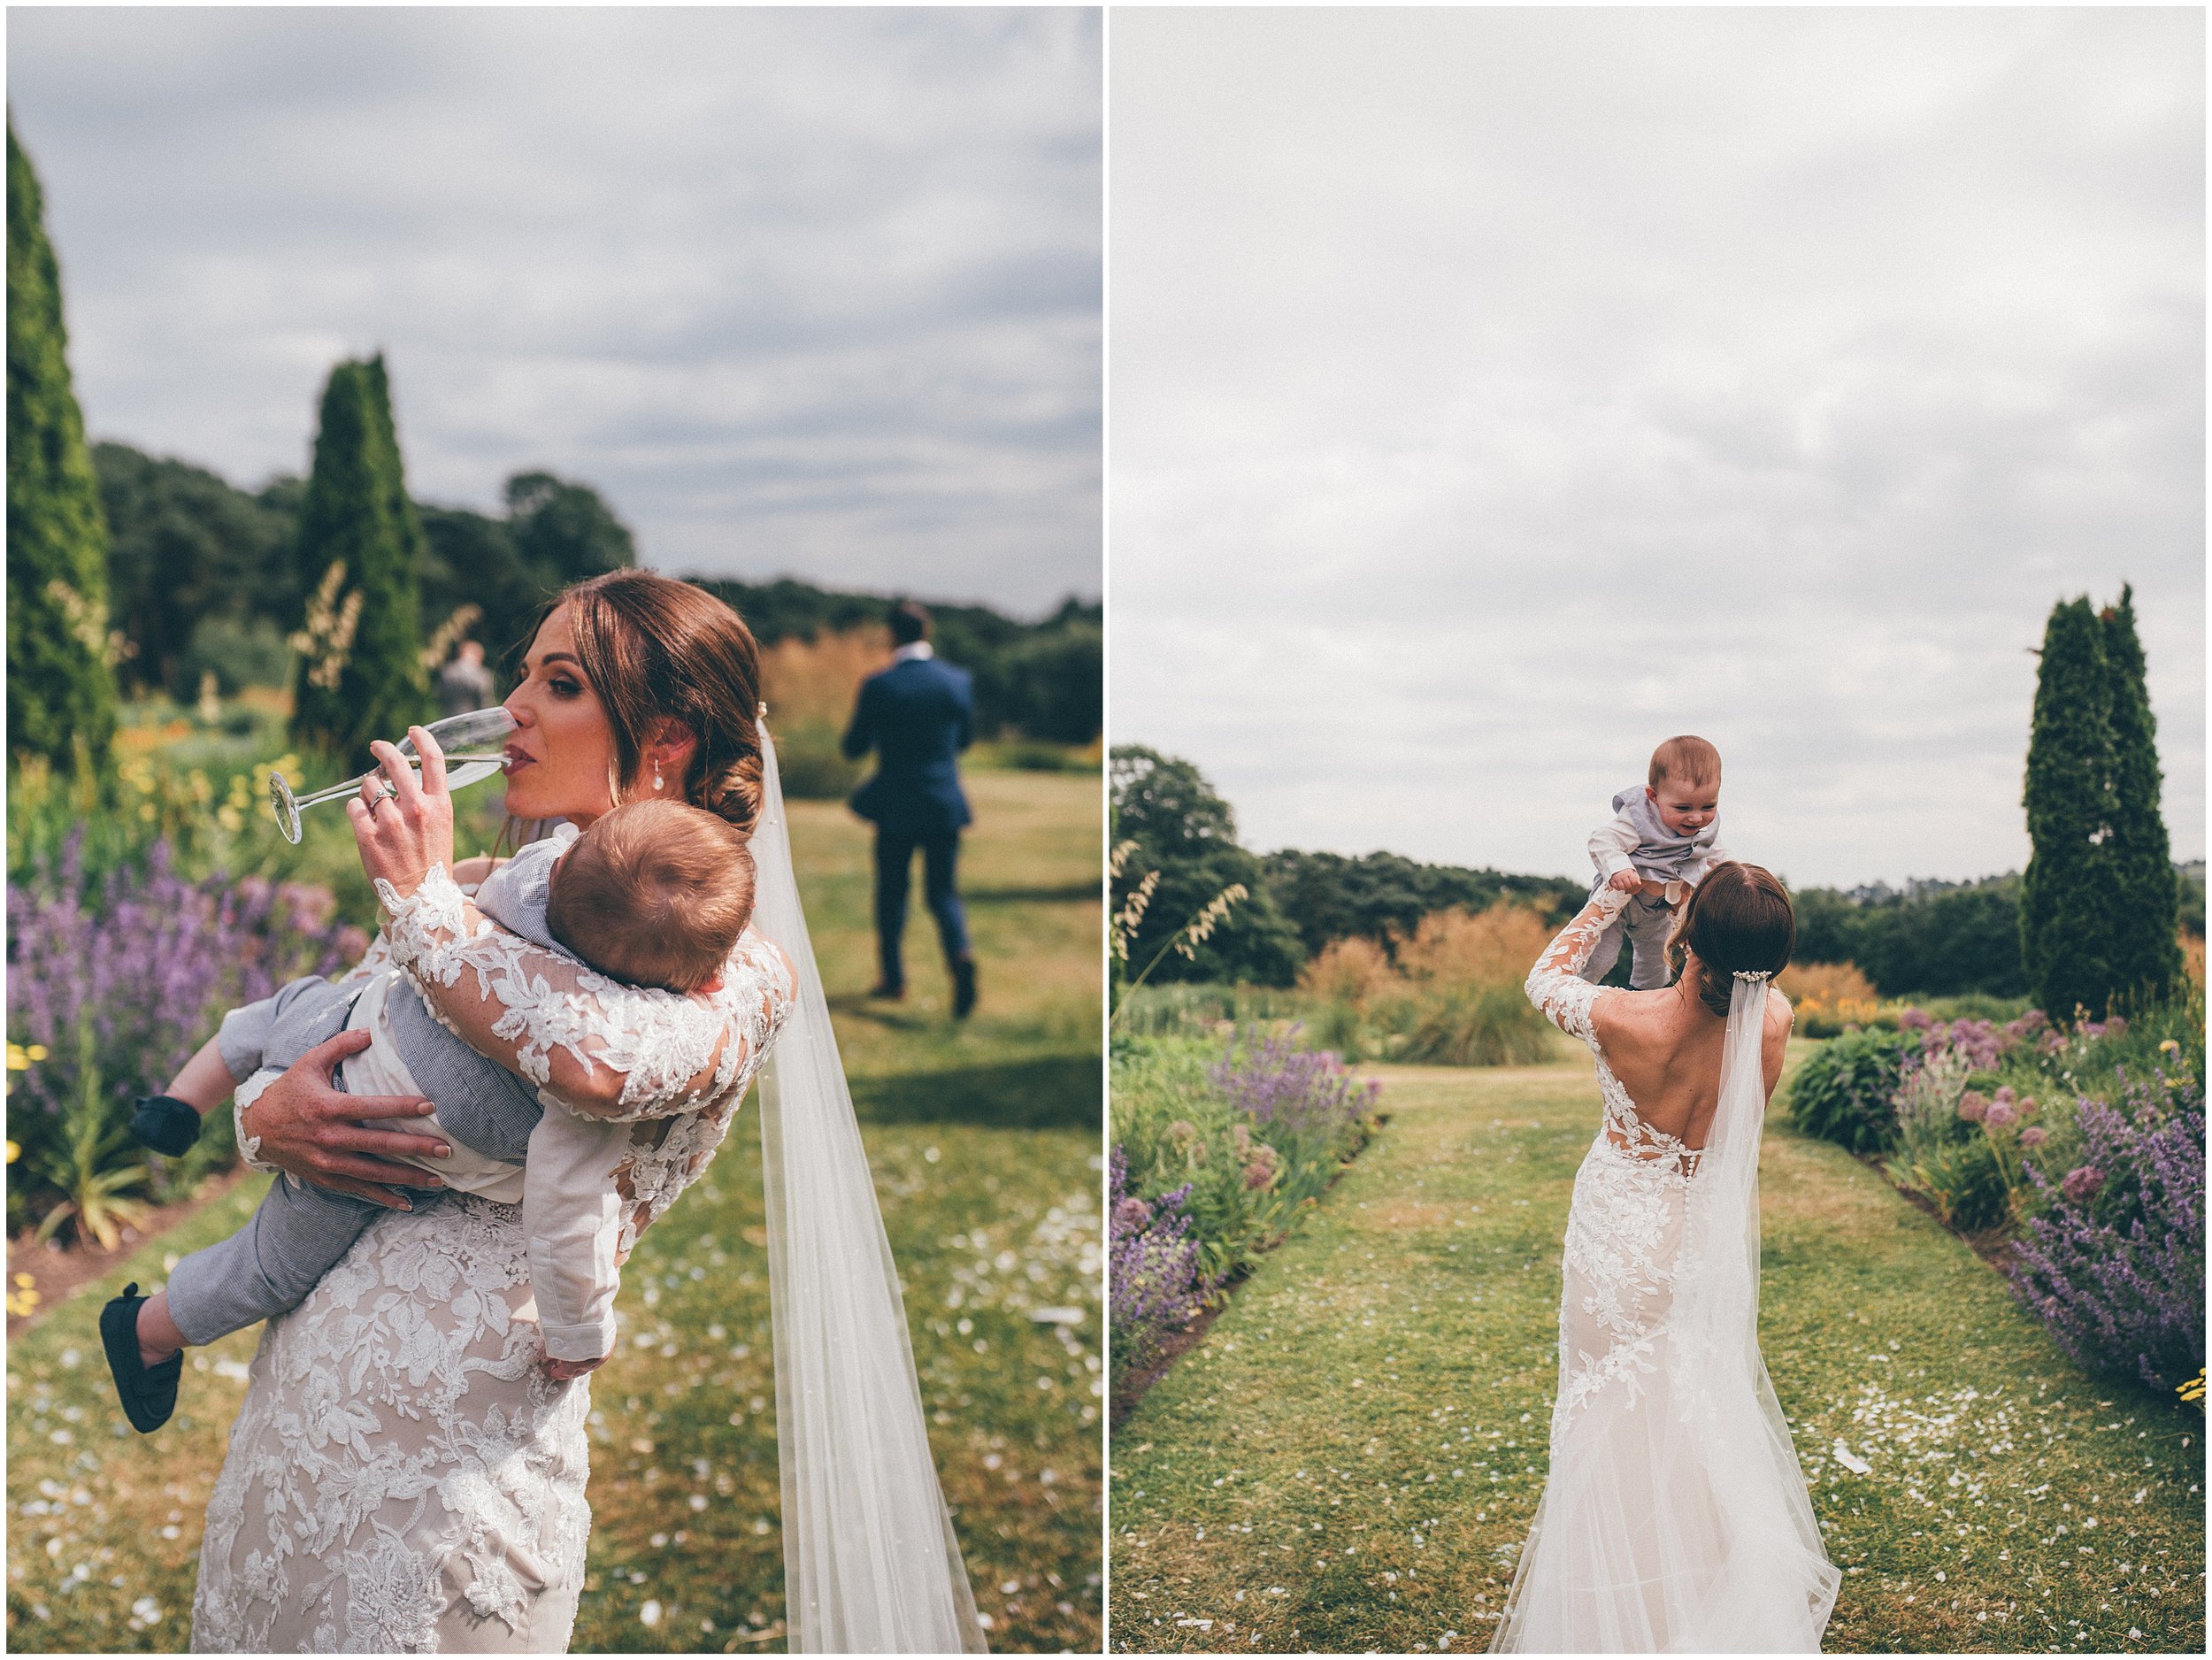 Beautiful bride and her son enjoy the pretty gardens at Abbeywood Estate in Delamere, Cheshire.